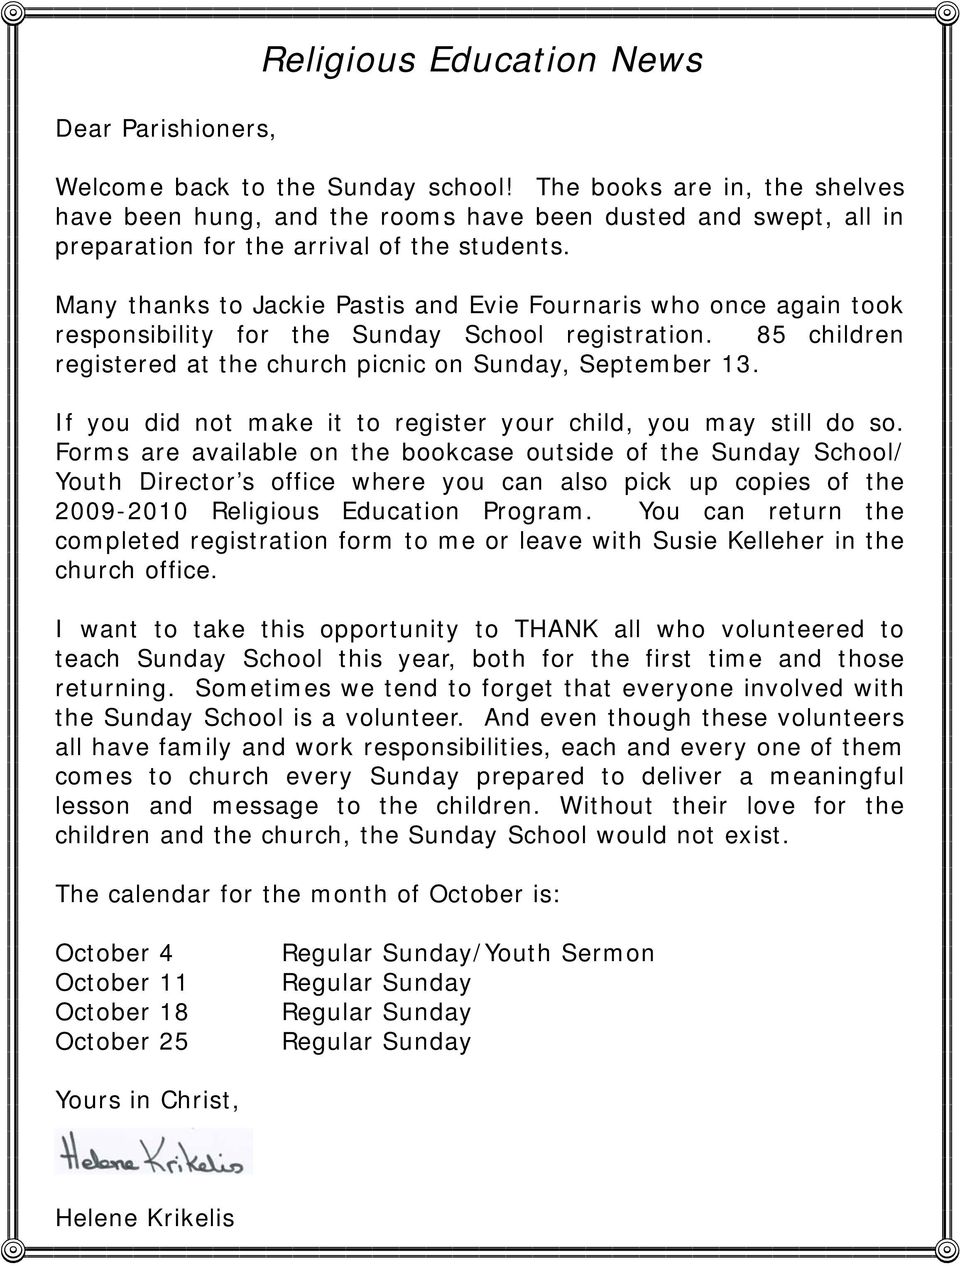 Many thanks to Jackie Pastis and Evie Fournaris who once again took responsibility for the Sunday School registration. 85 children registered at the church picnic on Sunday, September 13.